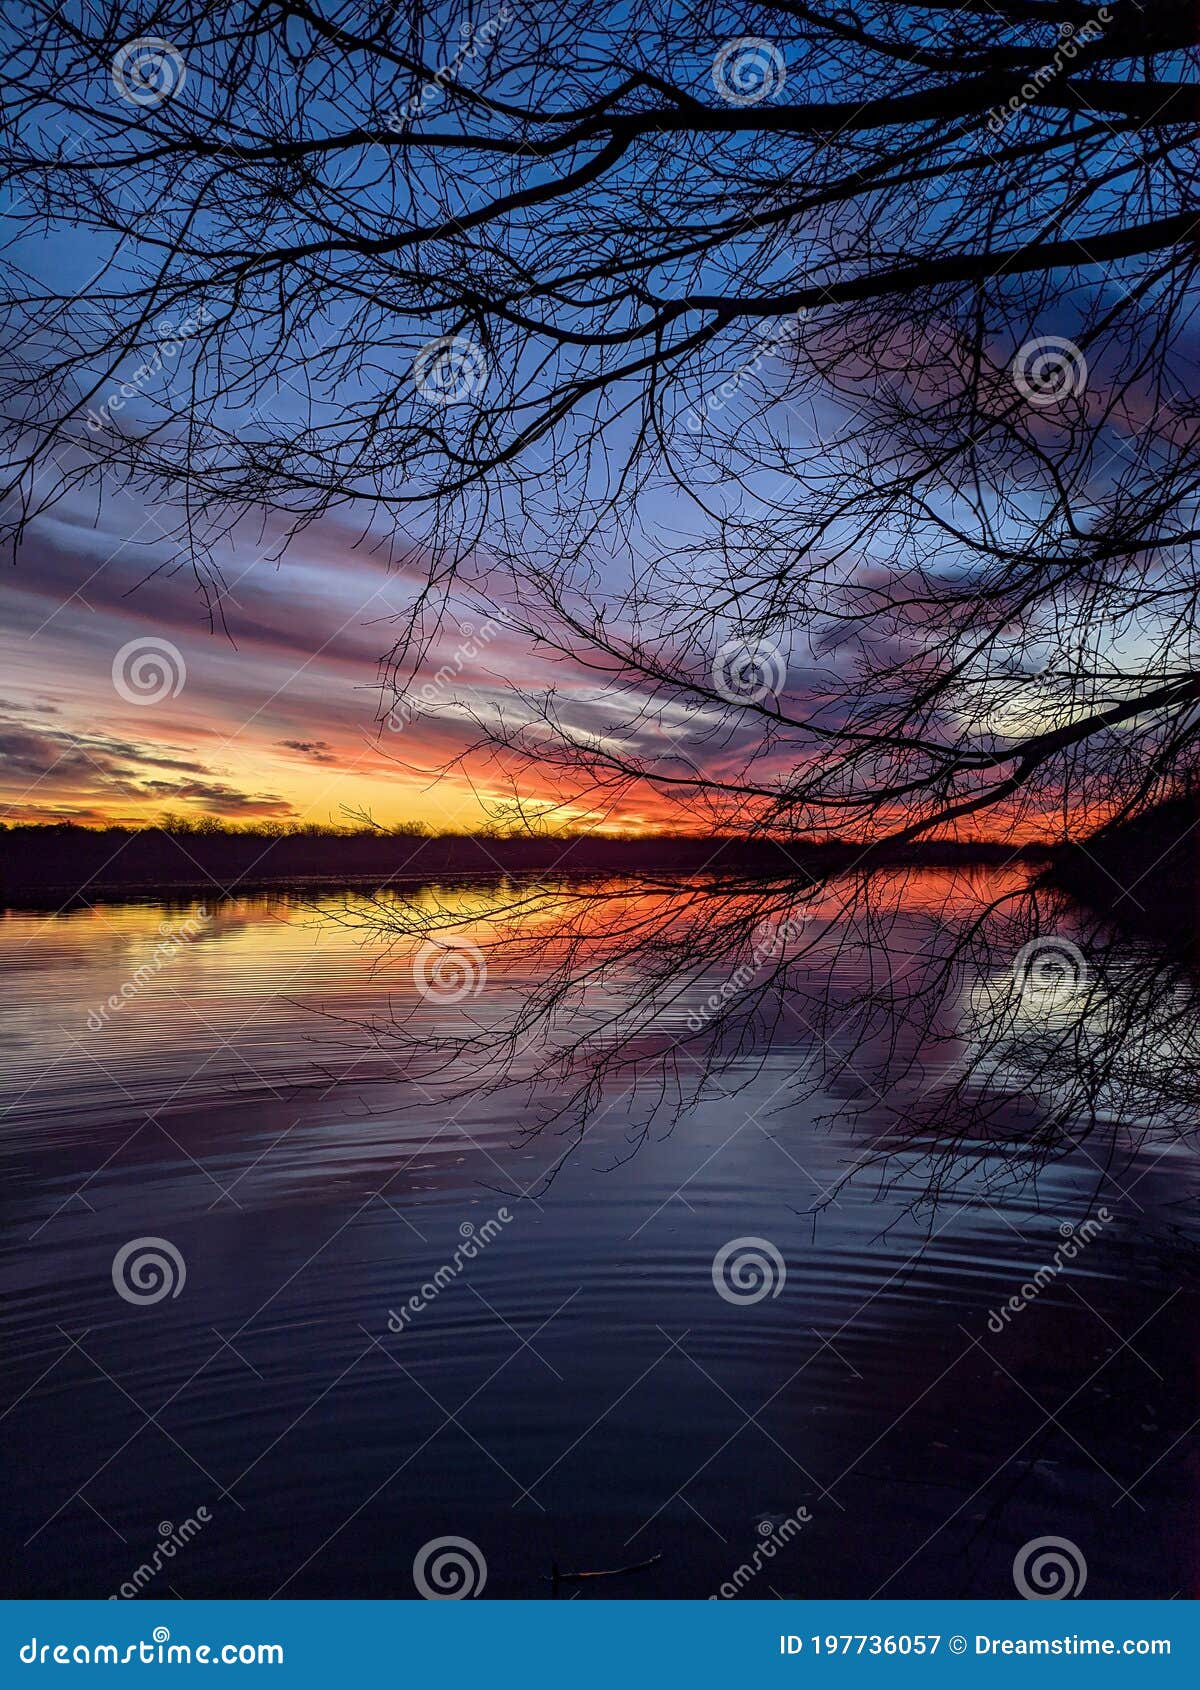 sunset in an argentinan river